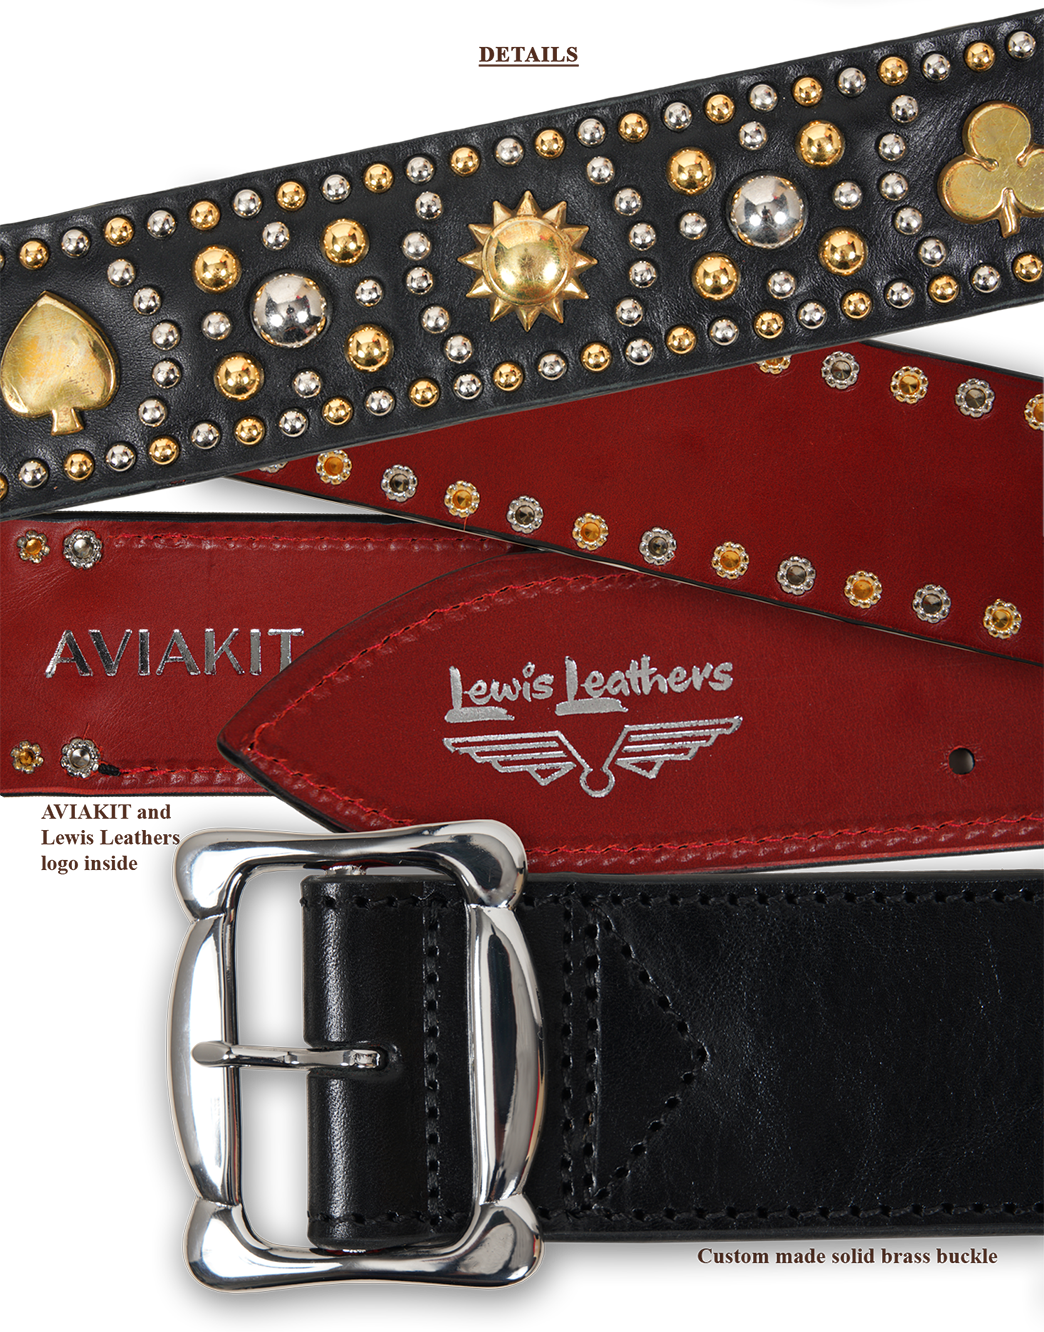 Lewis Leathers Club and Spade Belt